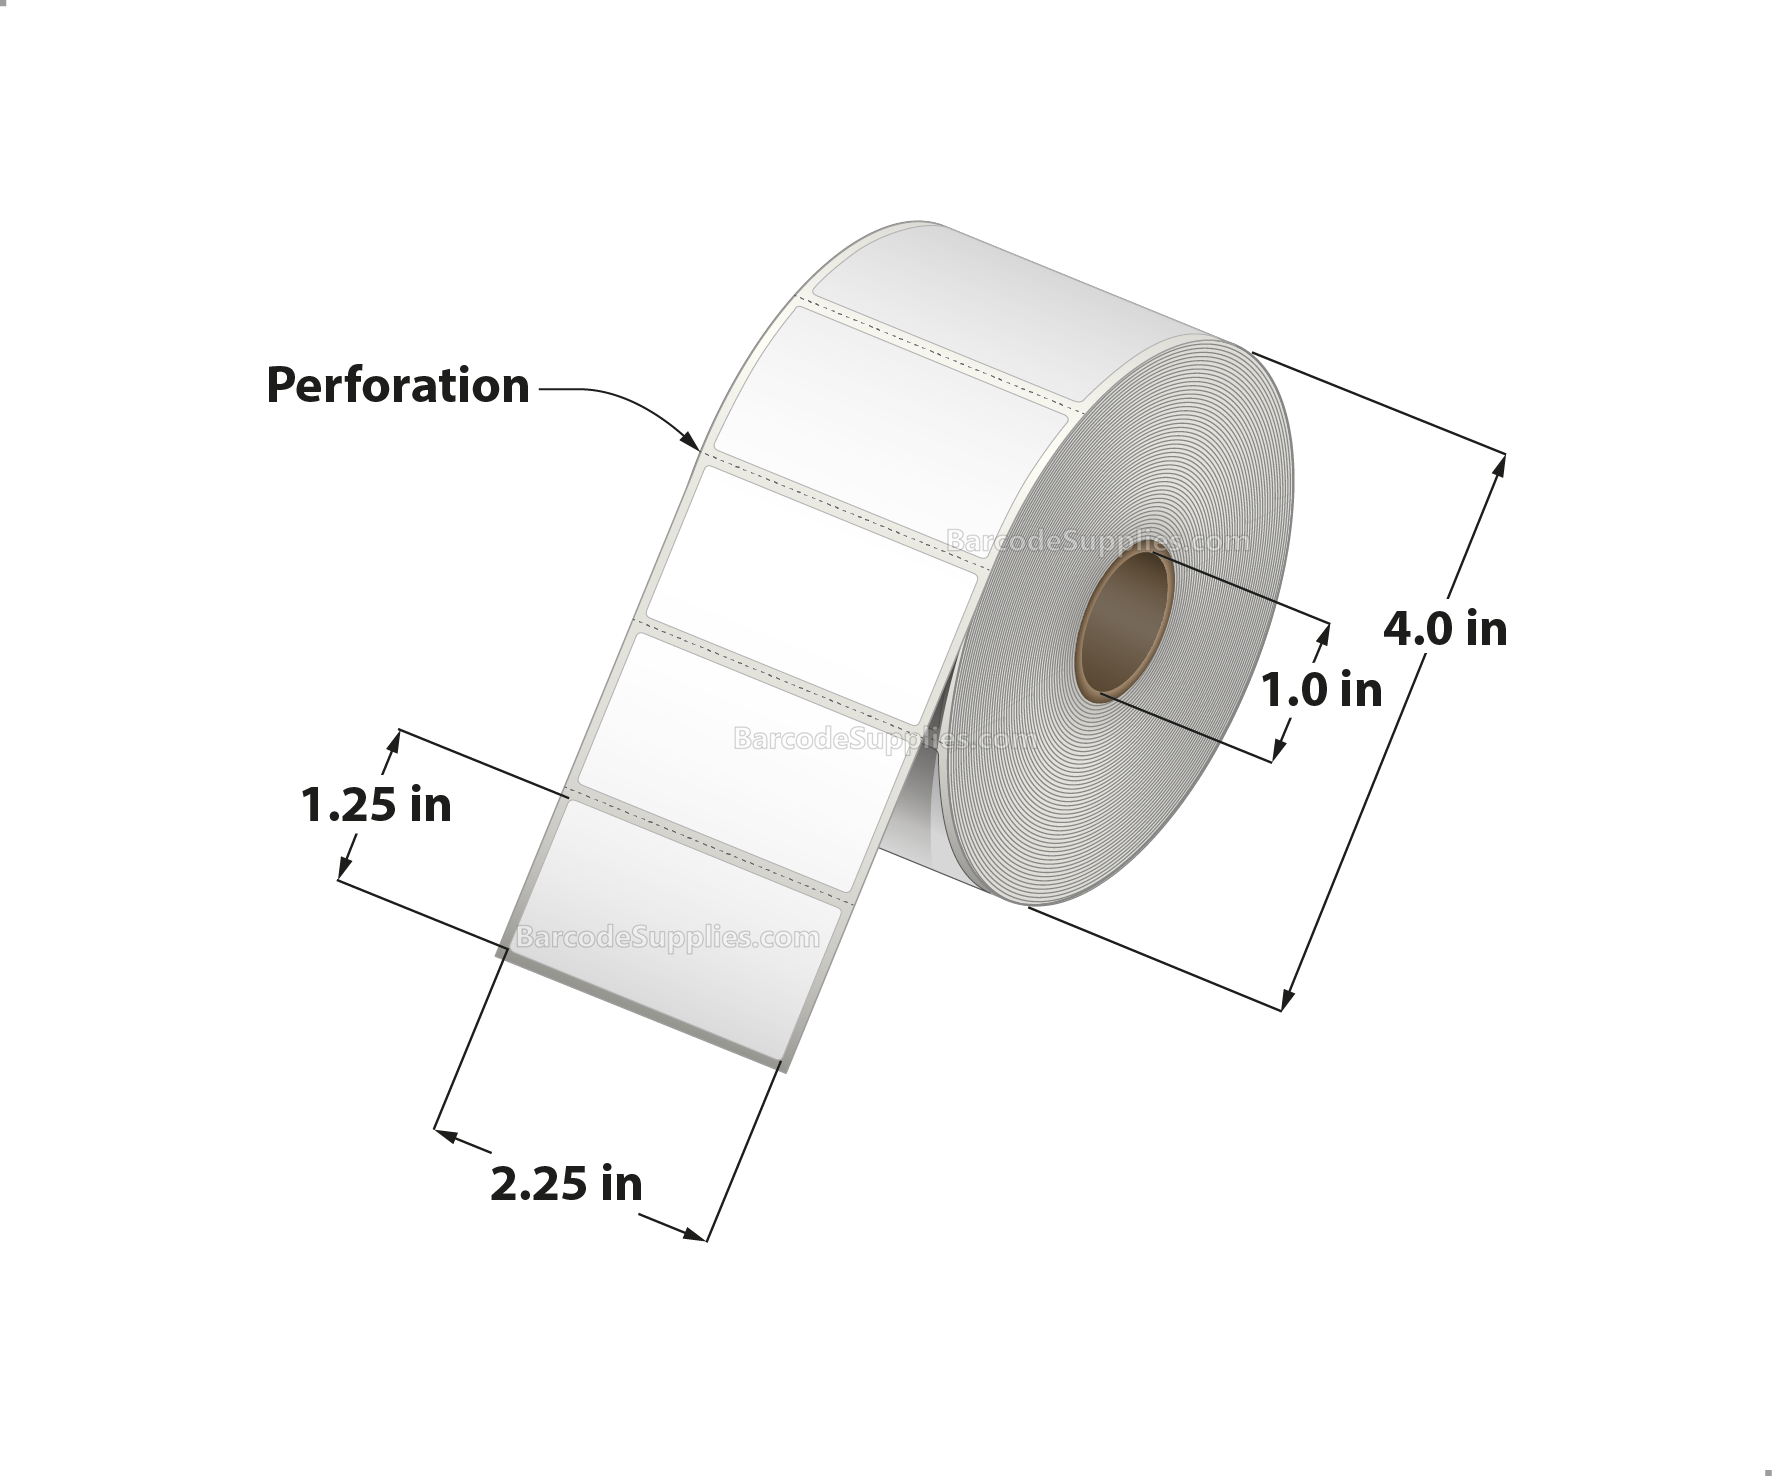 2.25 x 1.25 Direct Thermal White Labels With Rubber Adhesive - Perforated - 1135 Labels Per Roll - Carton Of 12 Rolls - 13620 Labels Total - MPN: RDT4-225125-1P